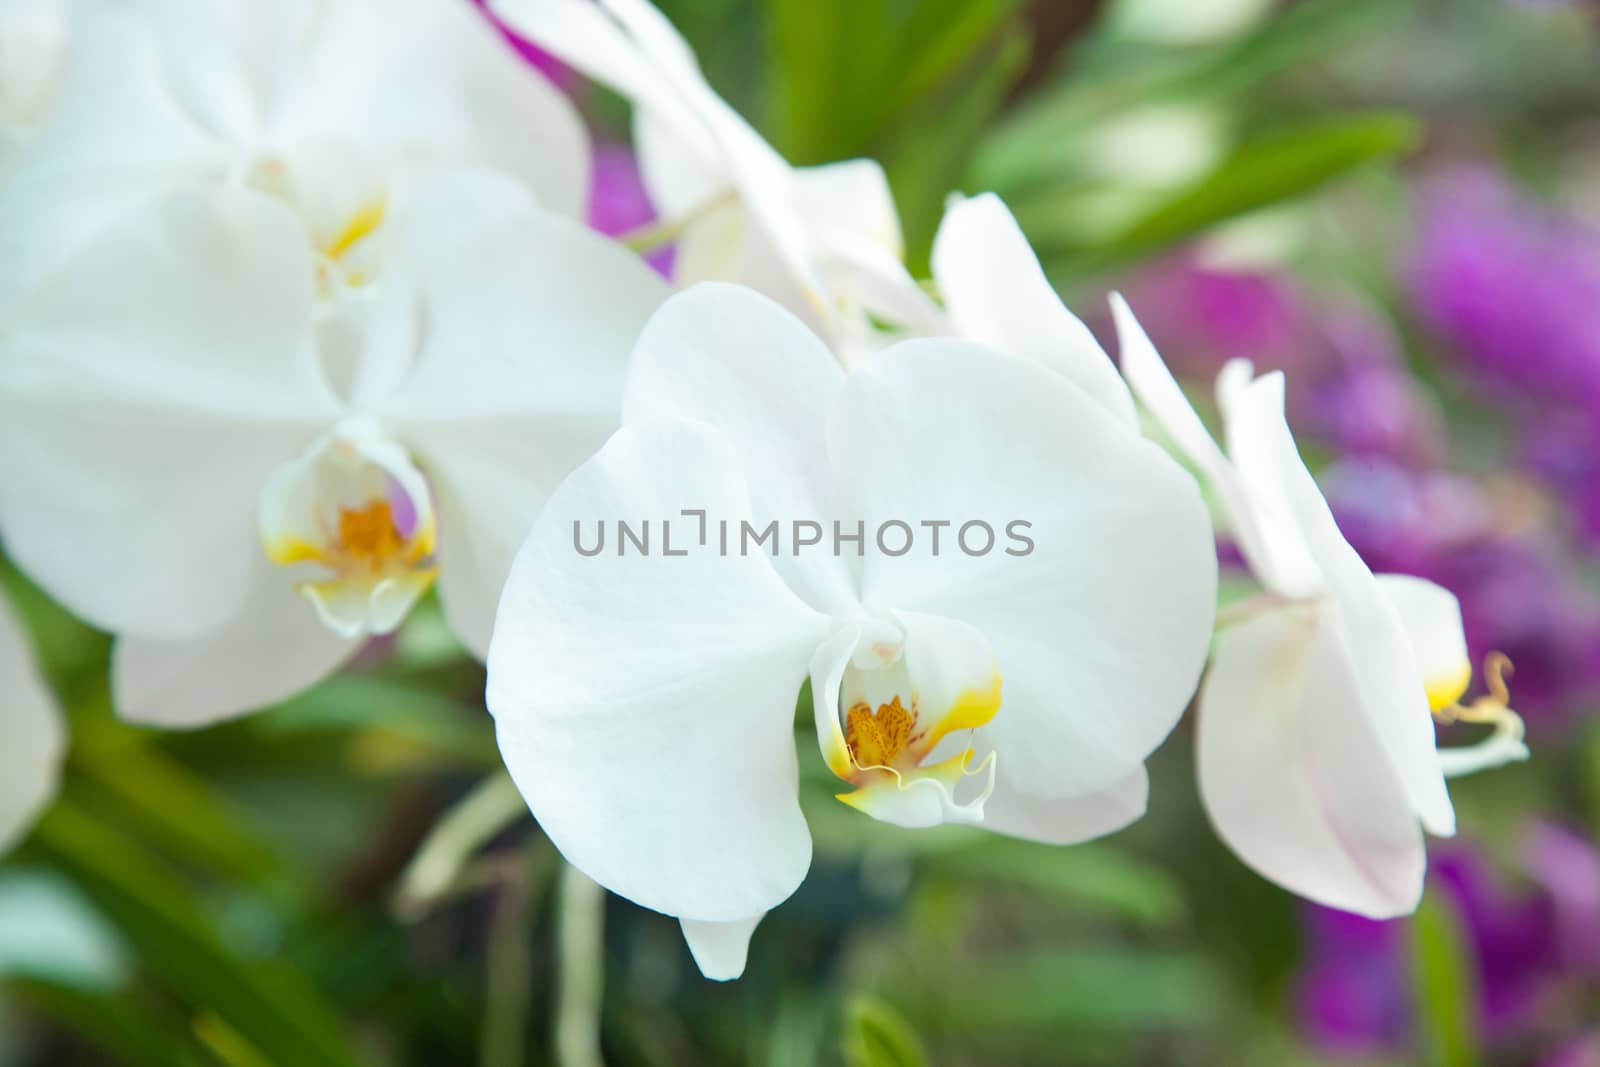 flowers of white orchids In full bloom with yellow stamens.